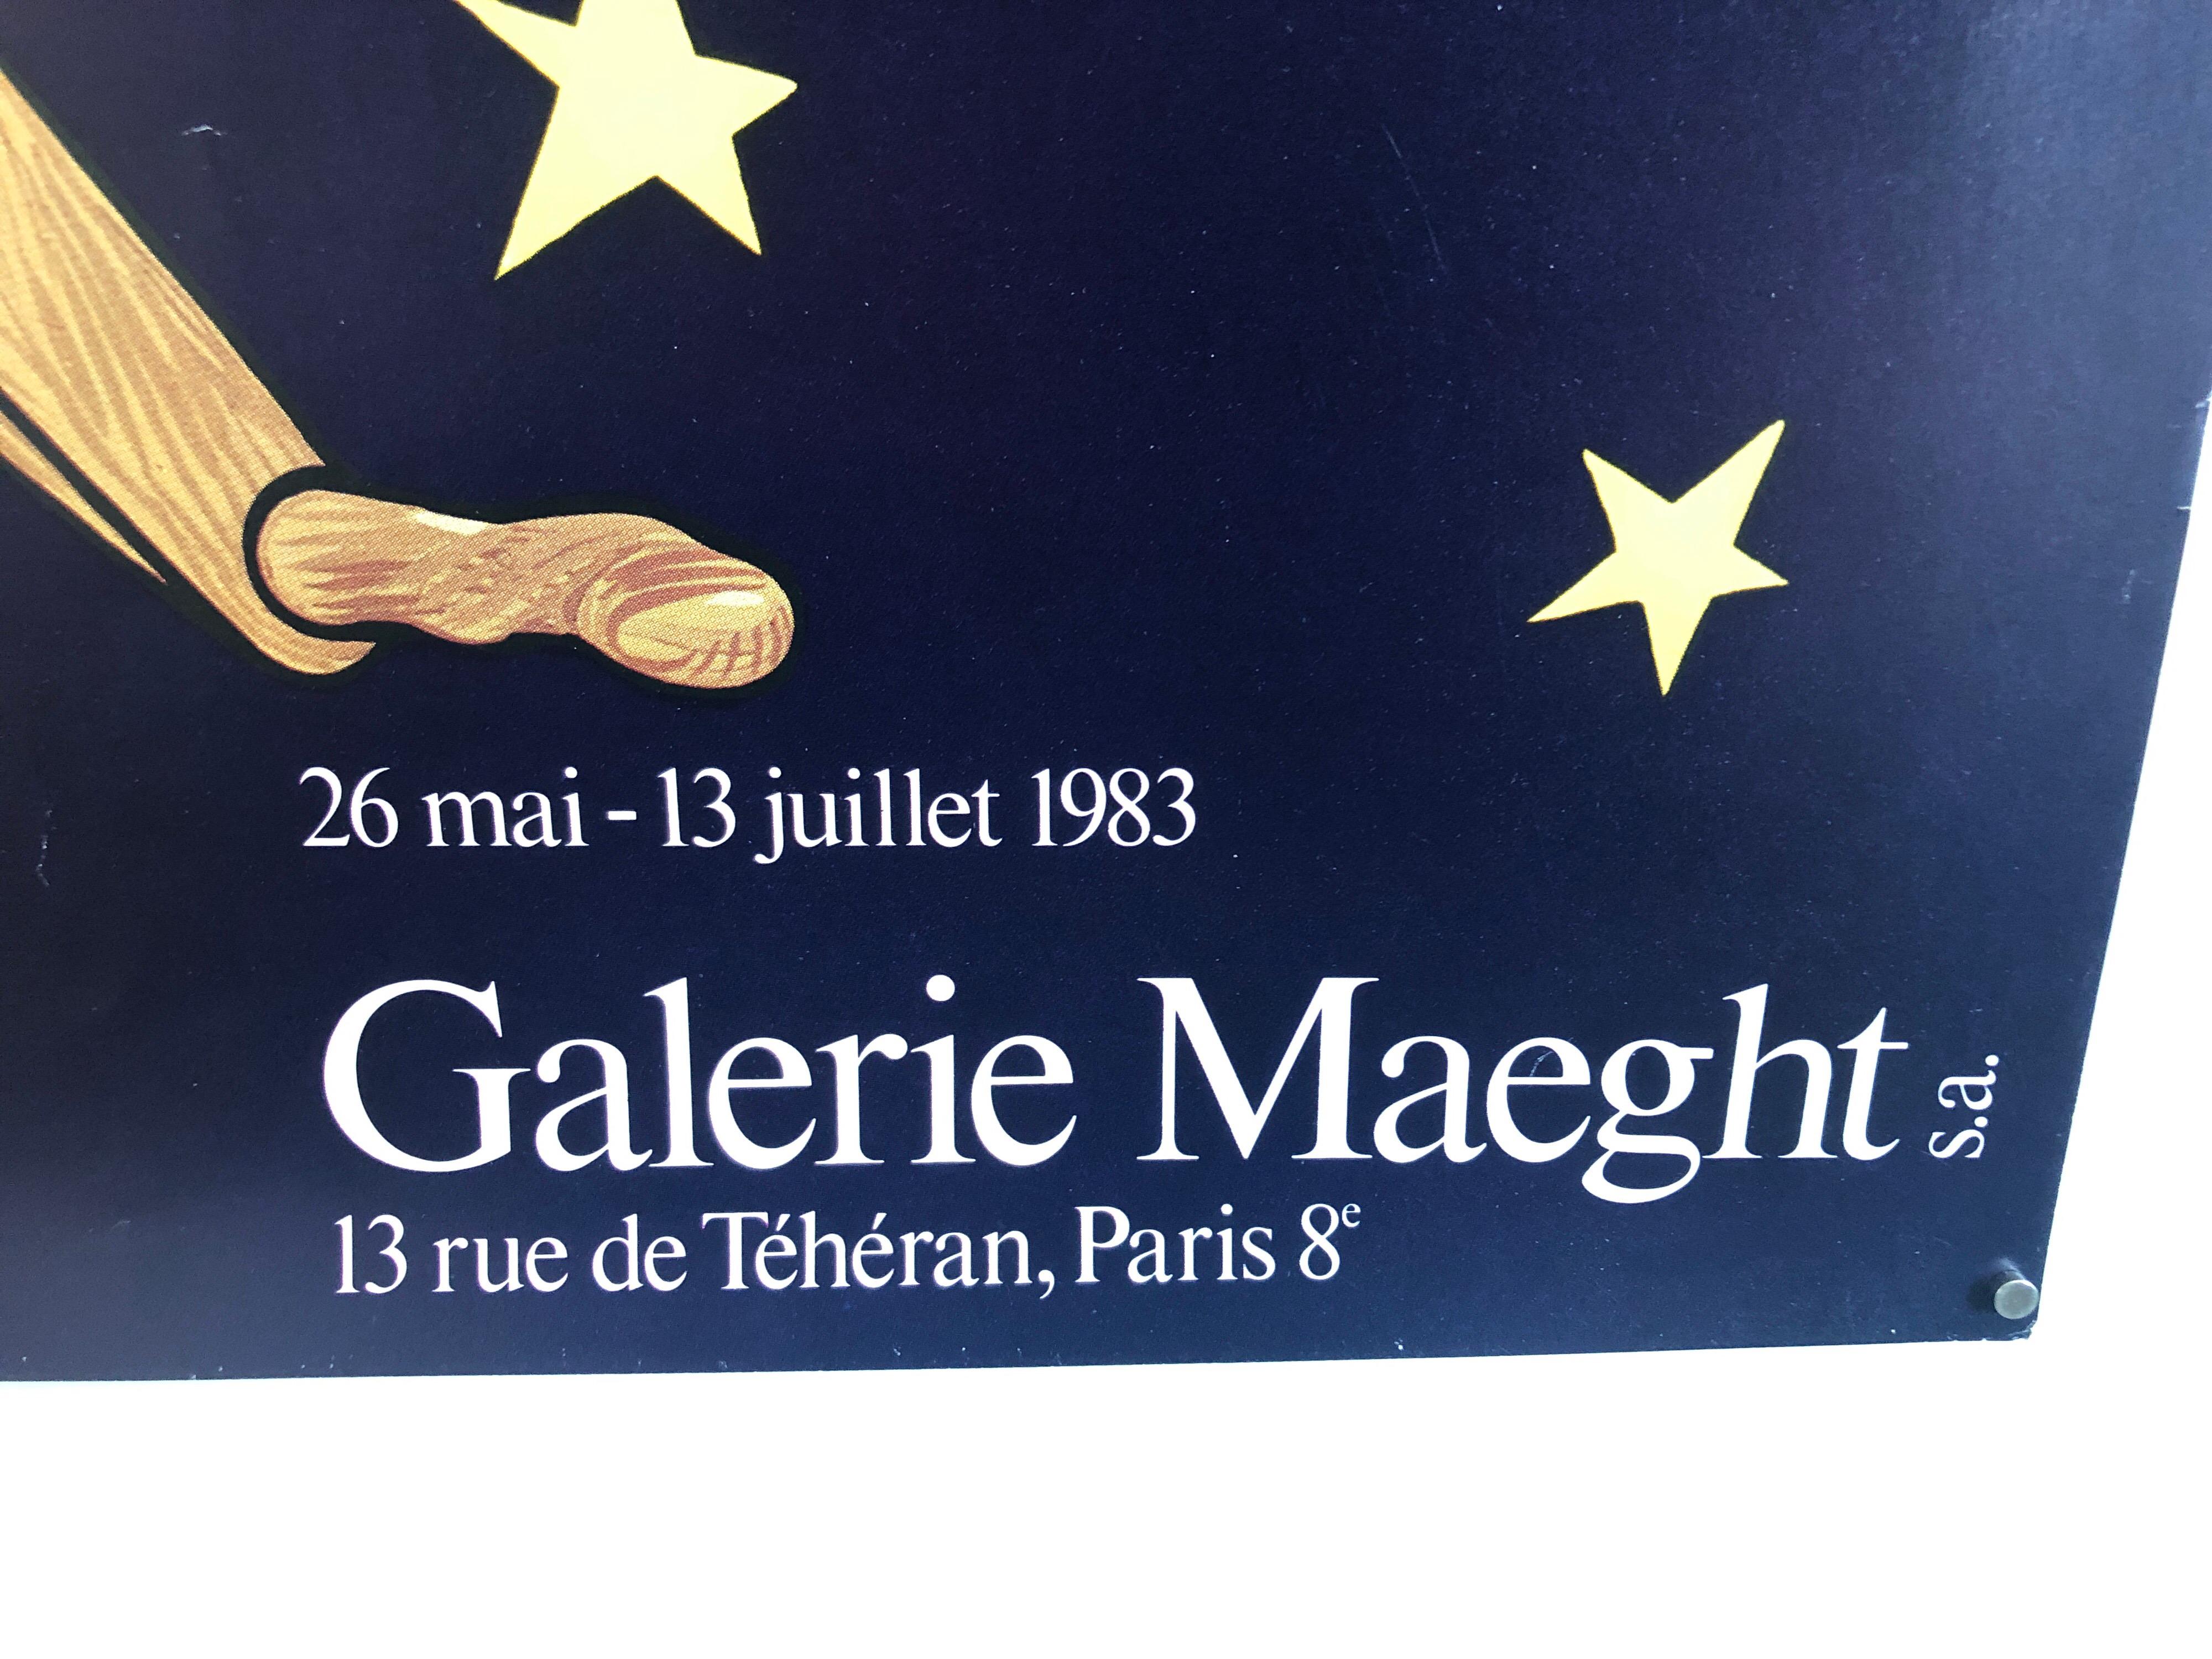 Vintage gallery exhibition poster. Navy blue and bold yellow stars with vibrant orange. Surrealist man in hat with scythe or fishing rod.
The Galerie Maeght is a gallery of modern art in Paris, France, and Barcelona, Catalonia, Spain. The gallery